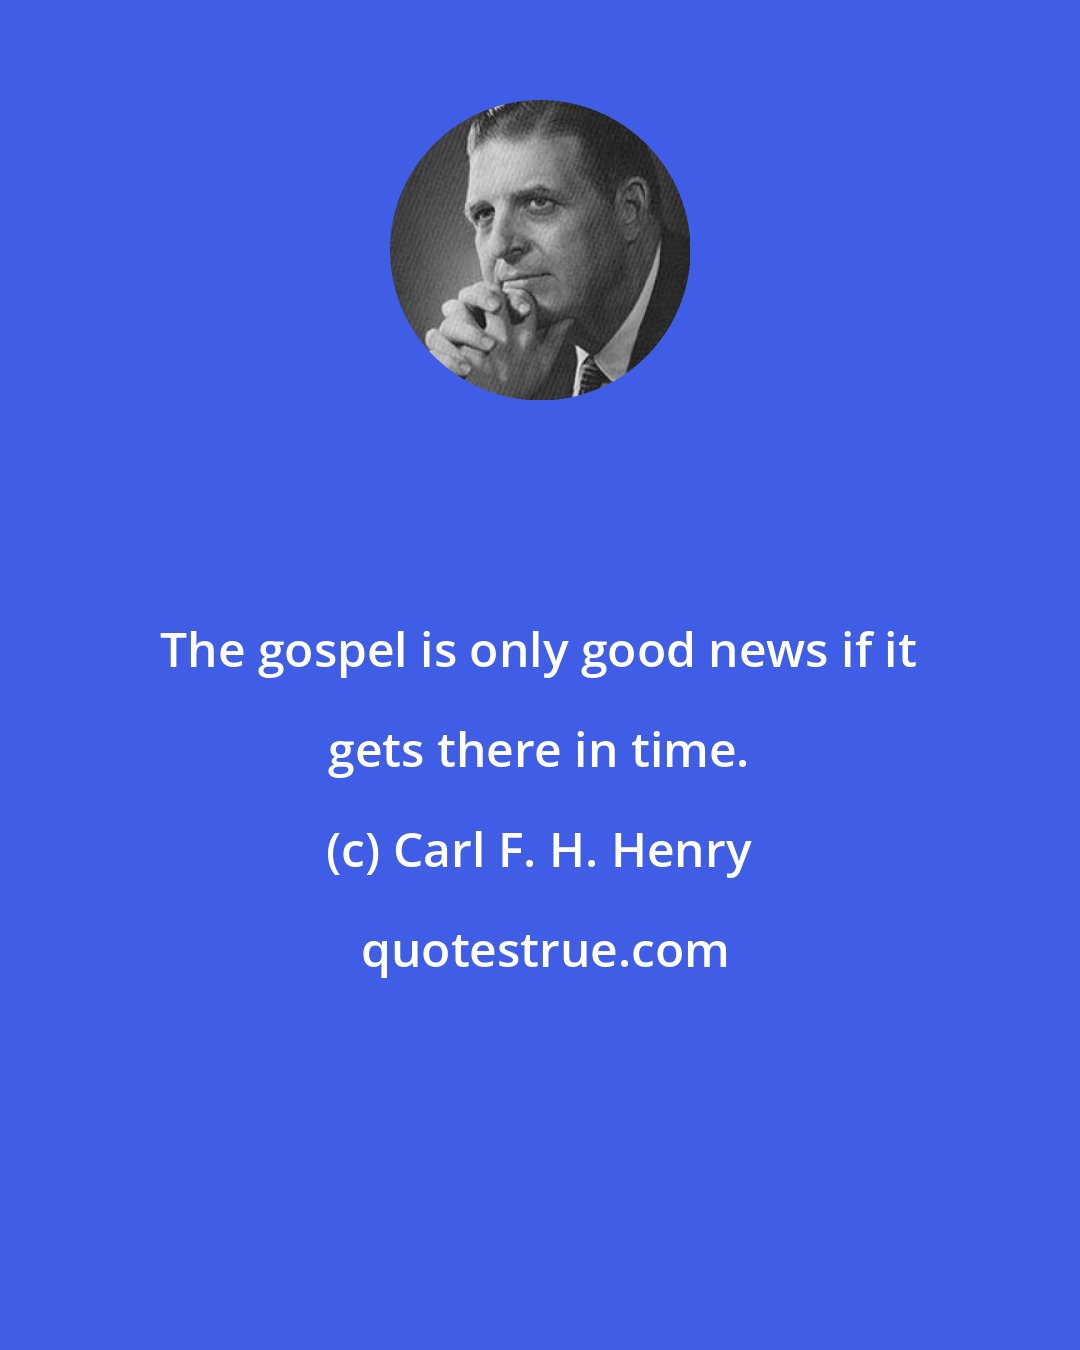 Carl F. H. Henry: The gospel is only good news if it gets there in time.